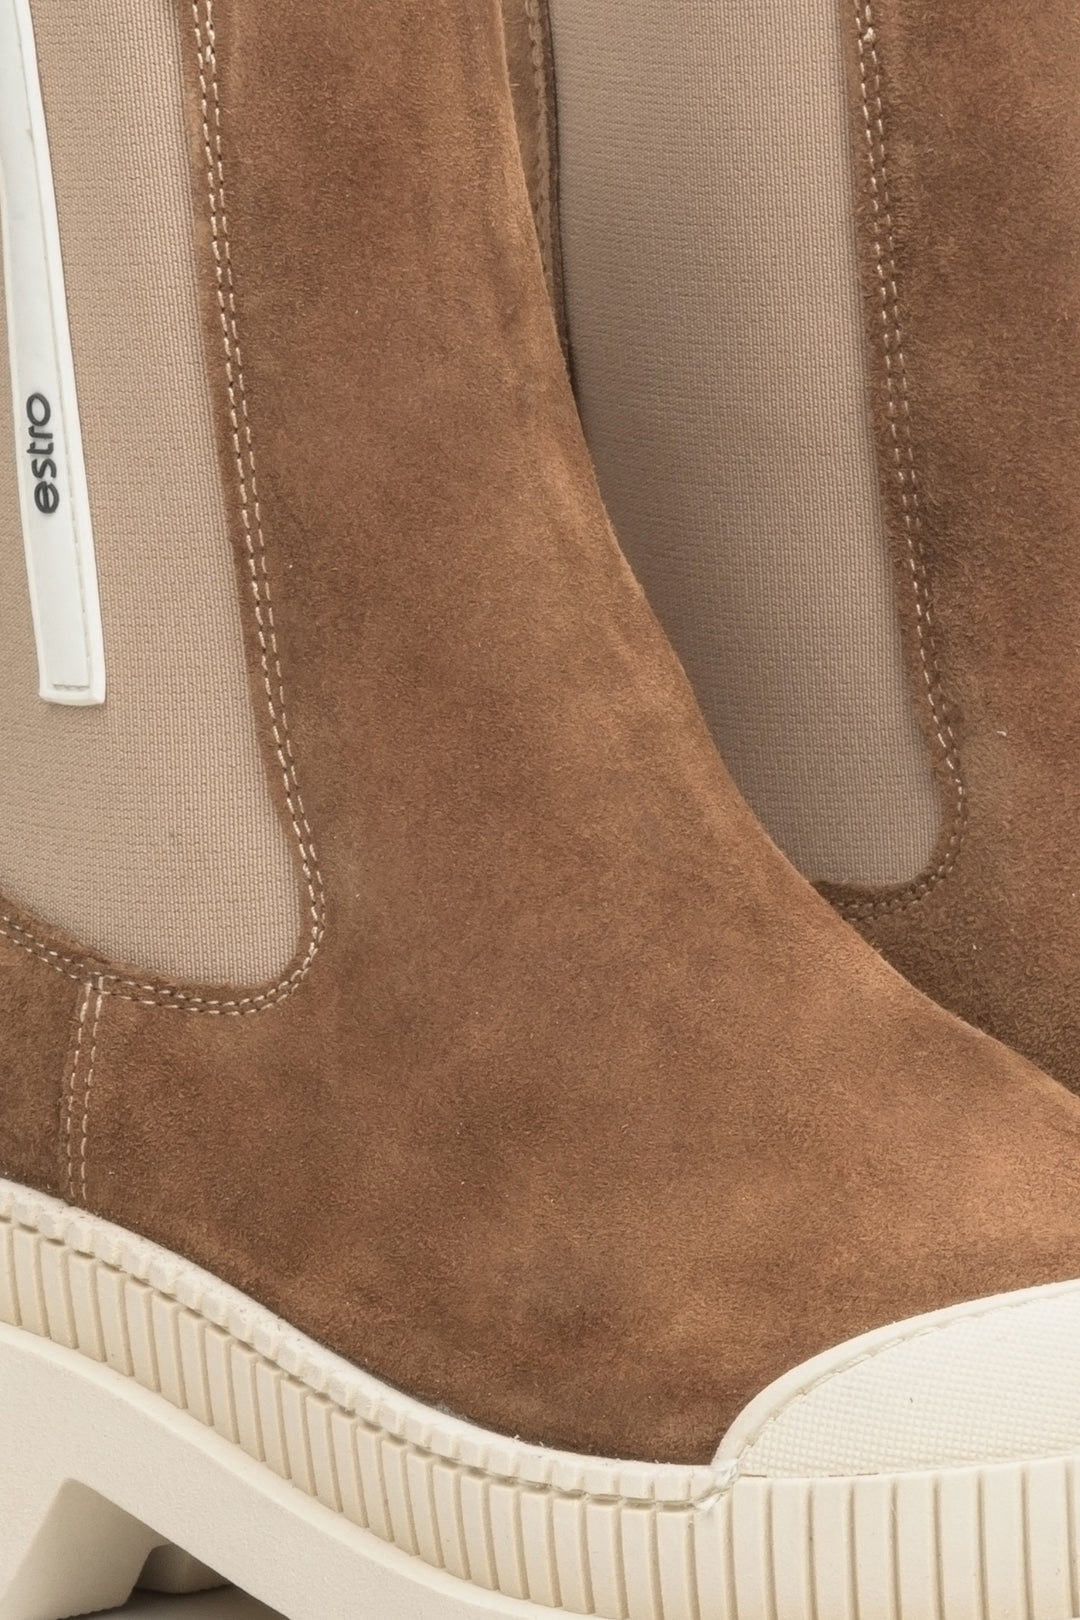 Women's brown-beige Estro Chelsea boots - close-up on the elastic uppers.